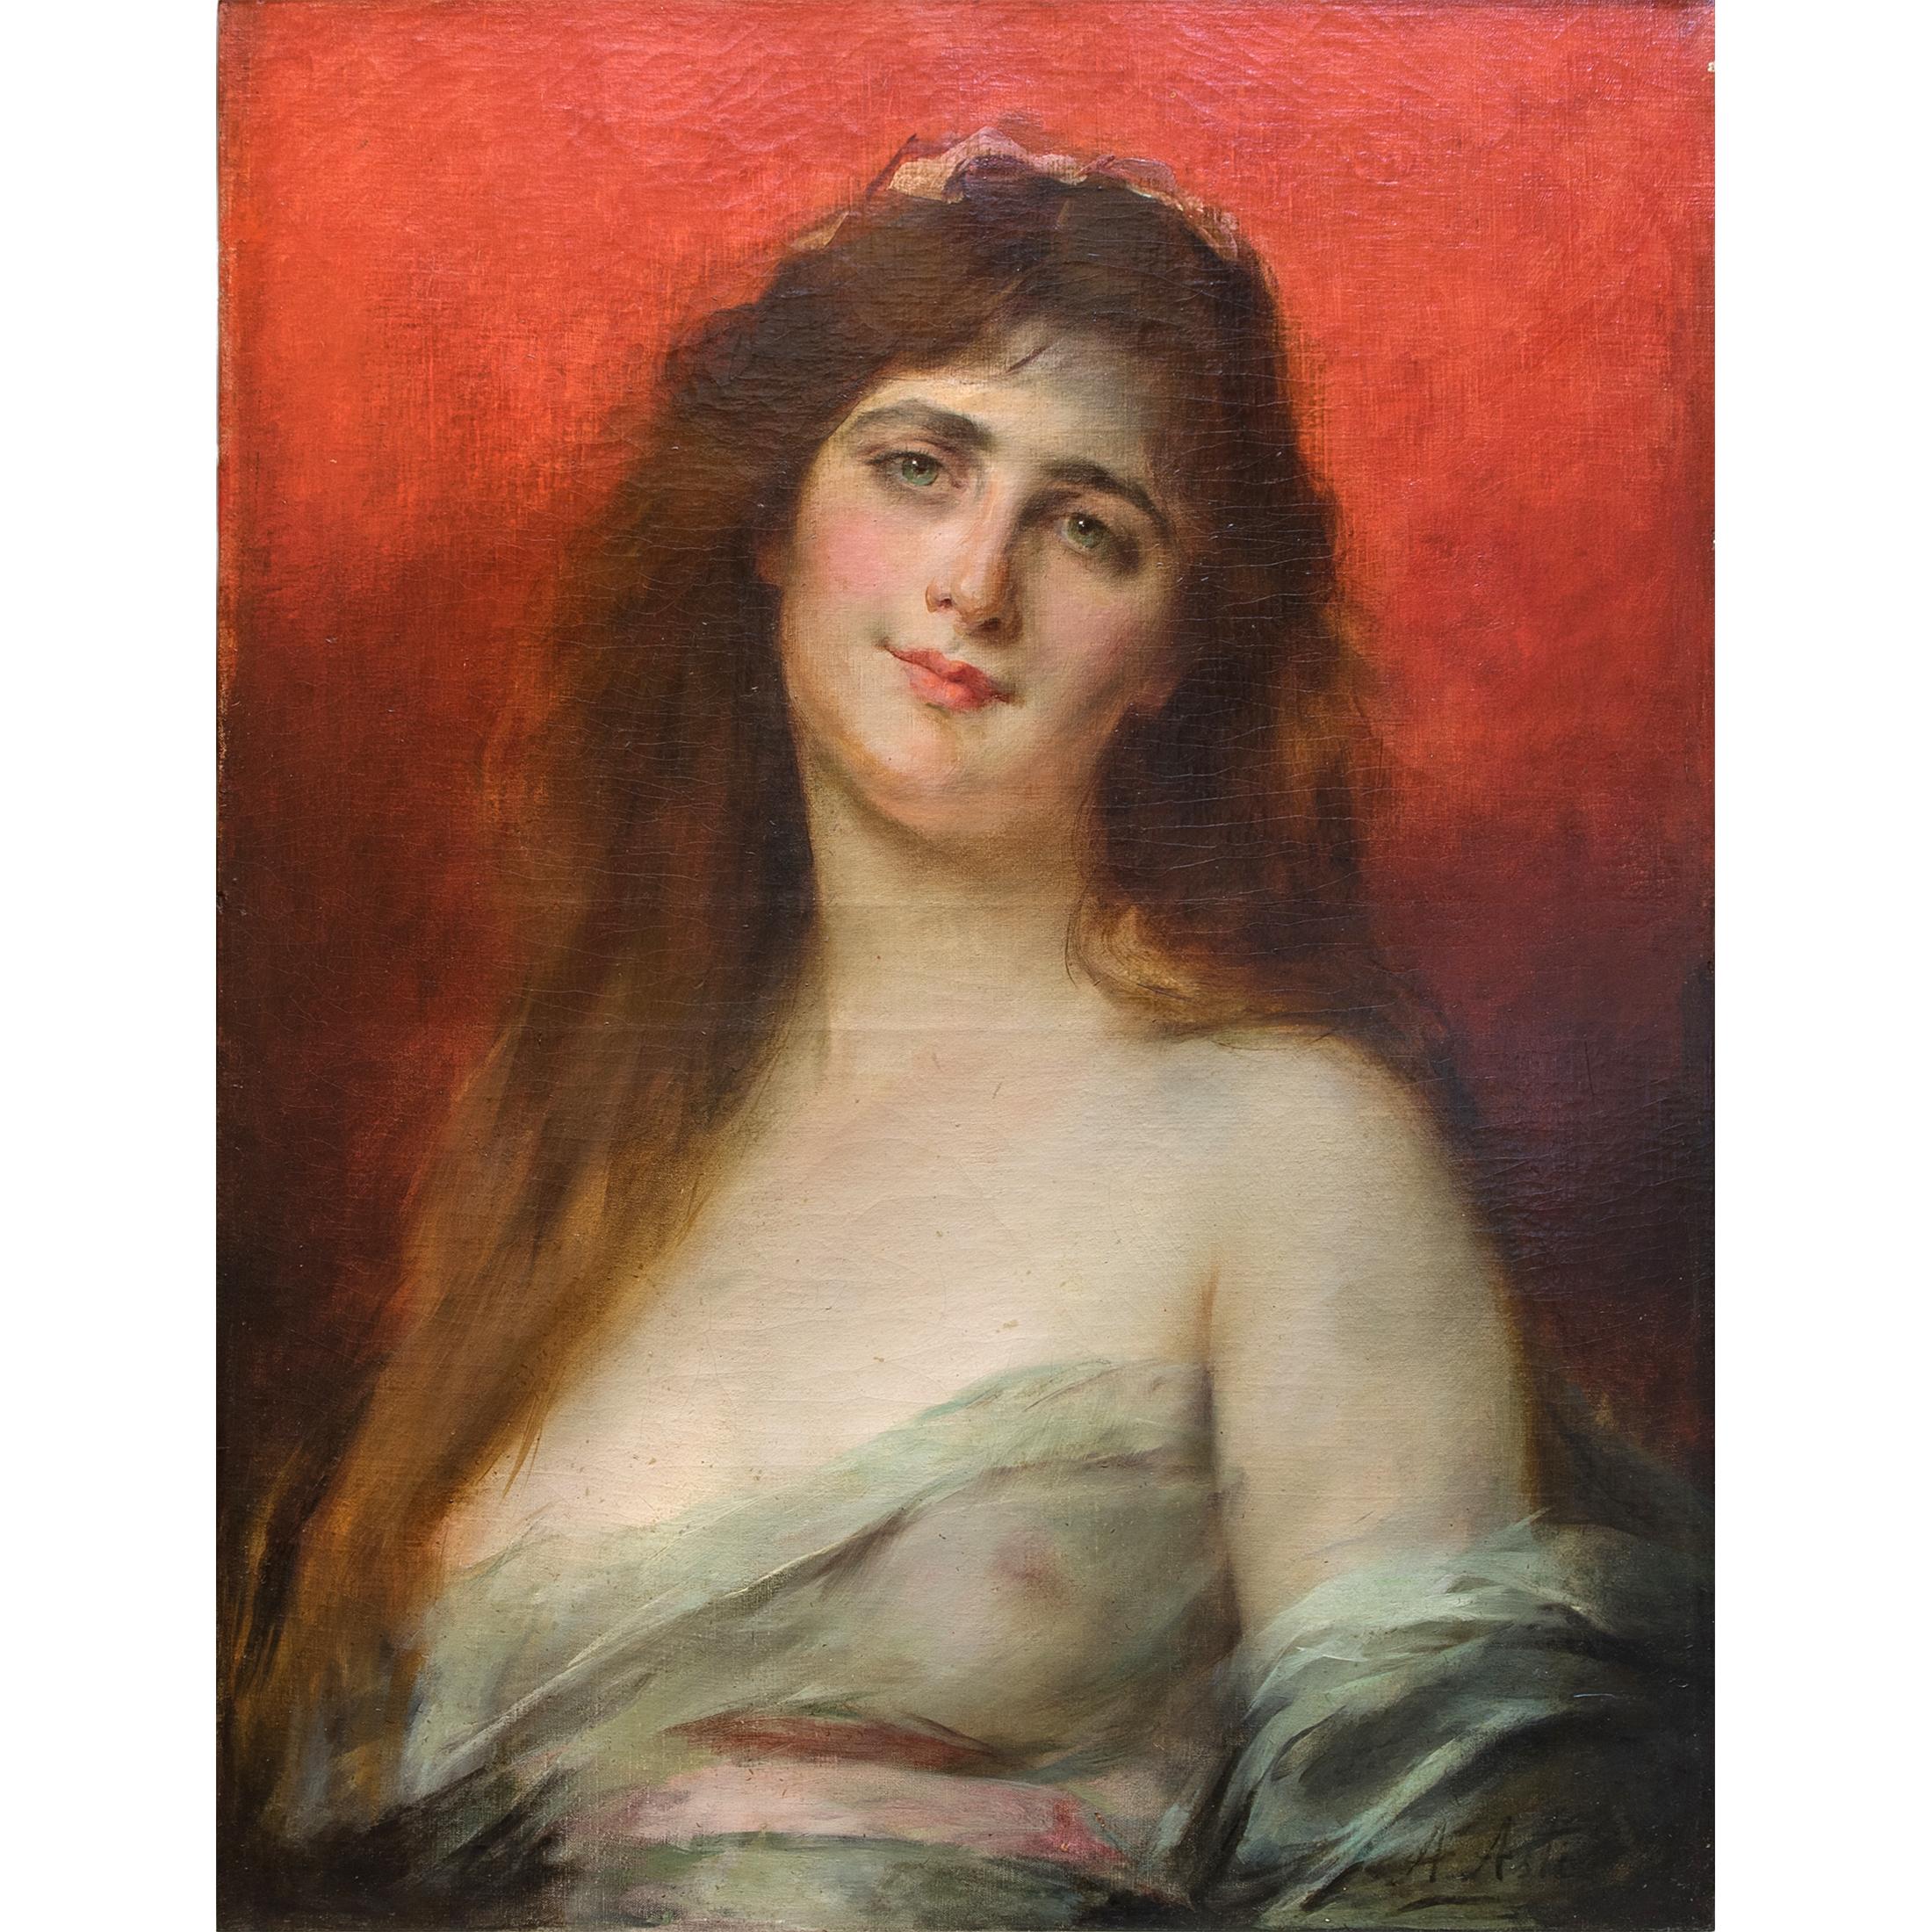 Beauty in Diaphanous Gown by Angelo Asti 
Title: Beauty in Diaphanous Gown
Artist: Angelo Asti (1847-1903)
Origin: Italian
Medium: Oil on canvas
Signature: Signed 